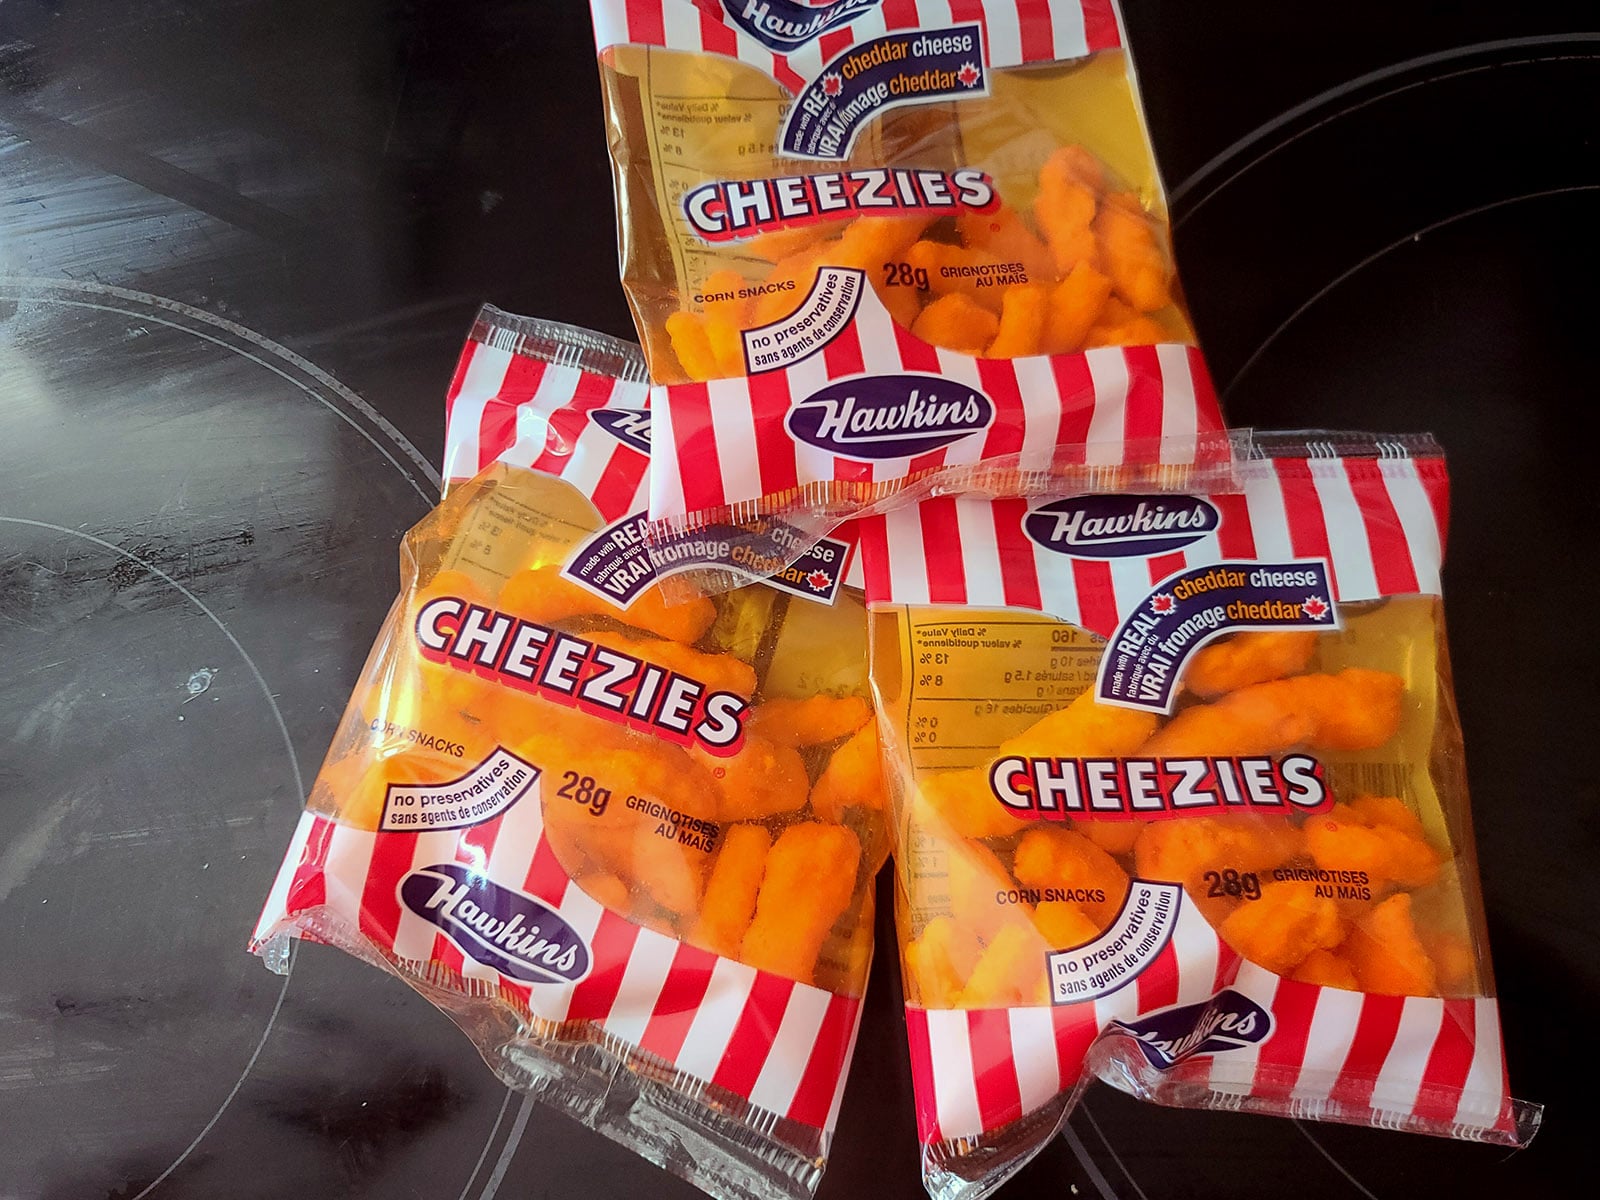 3 snack size bags of cheezies on a stove top.